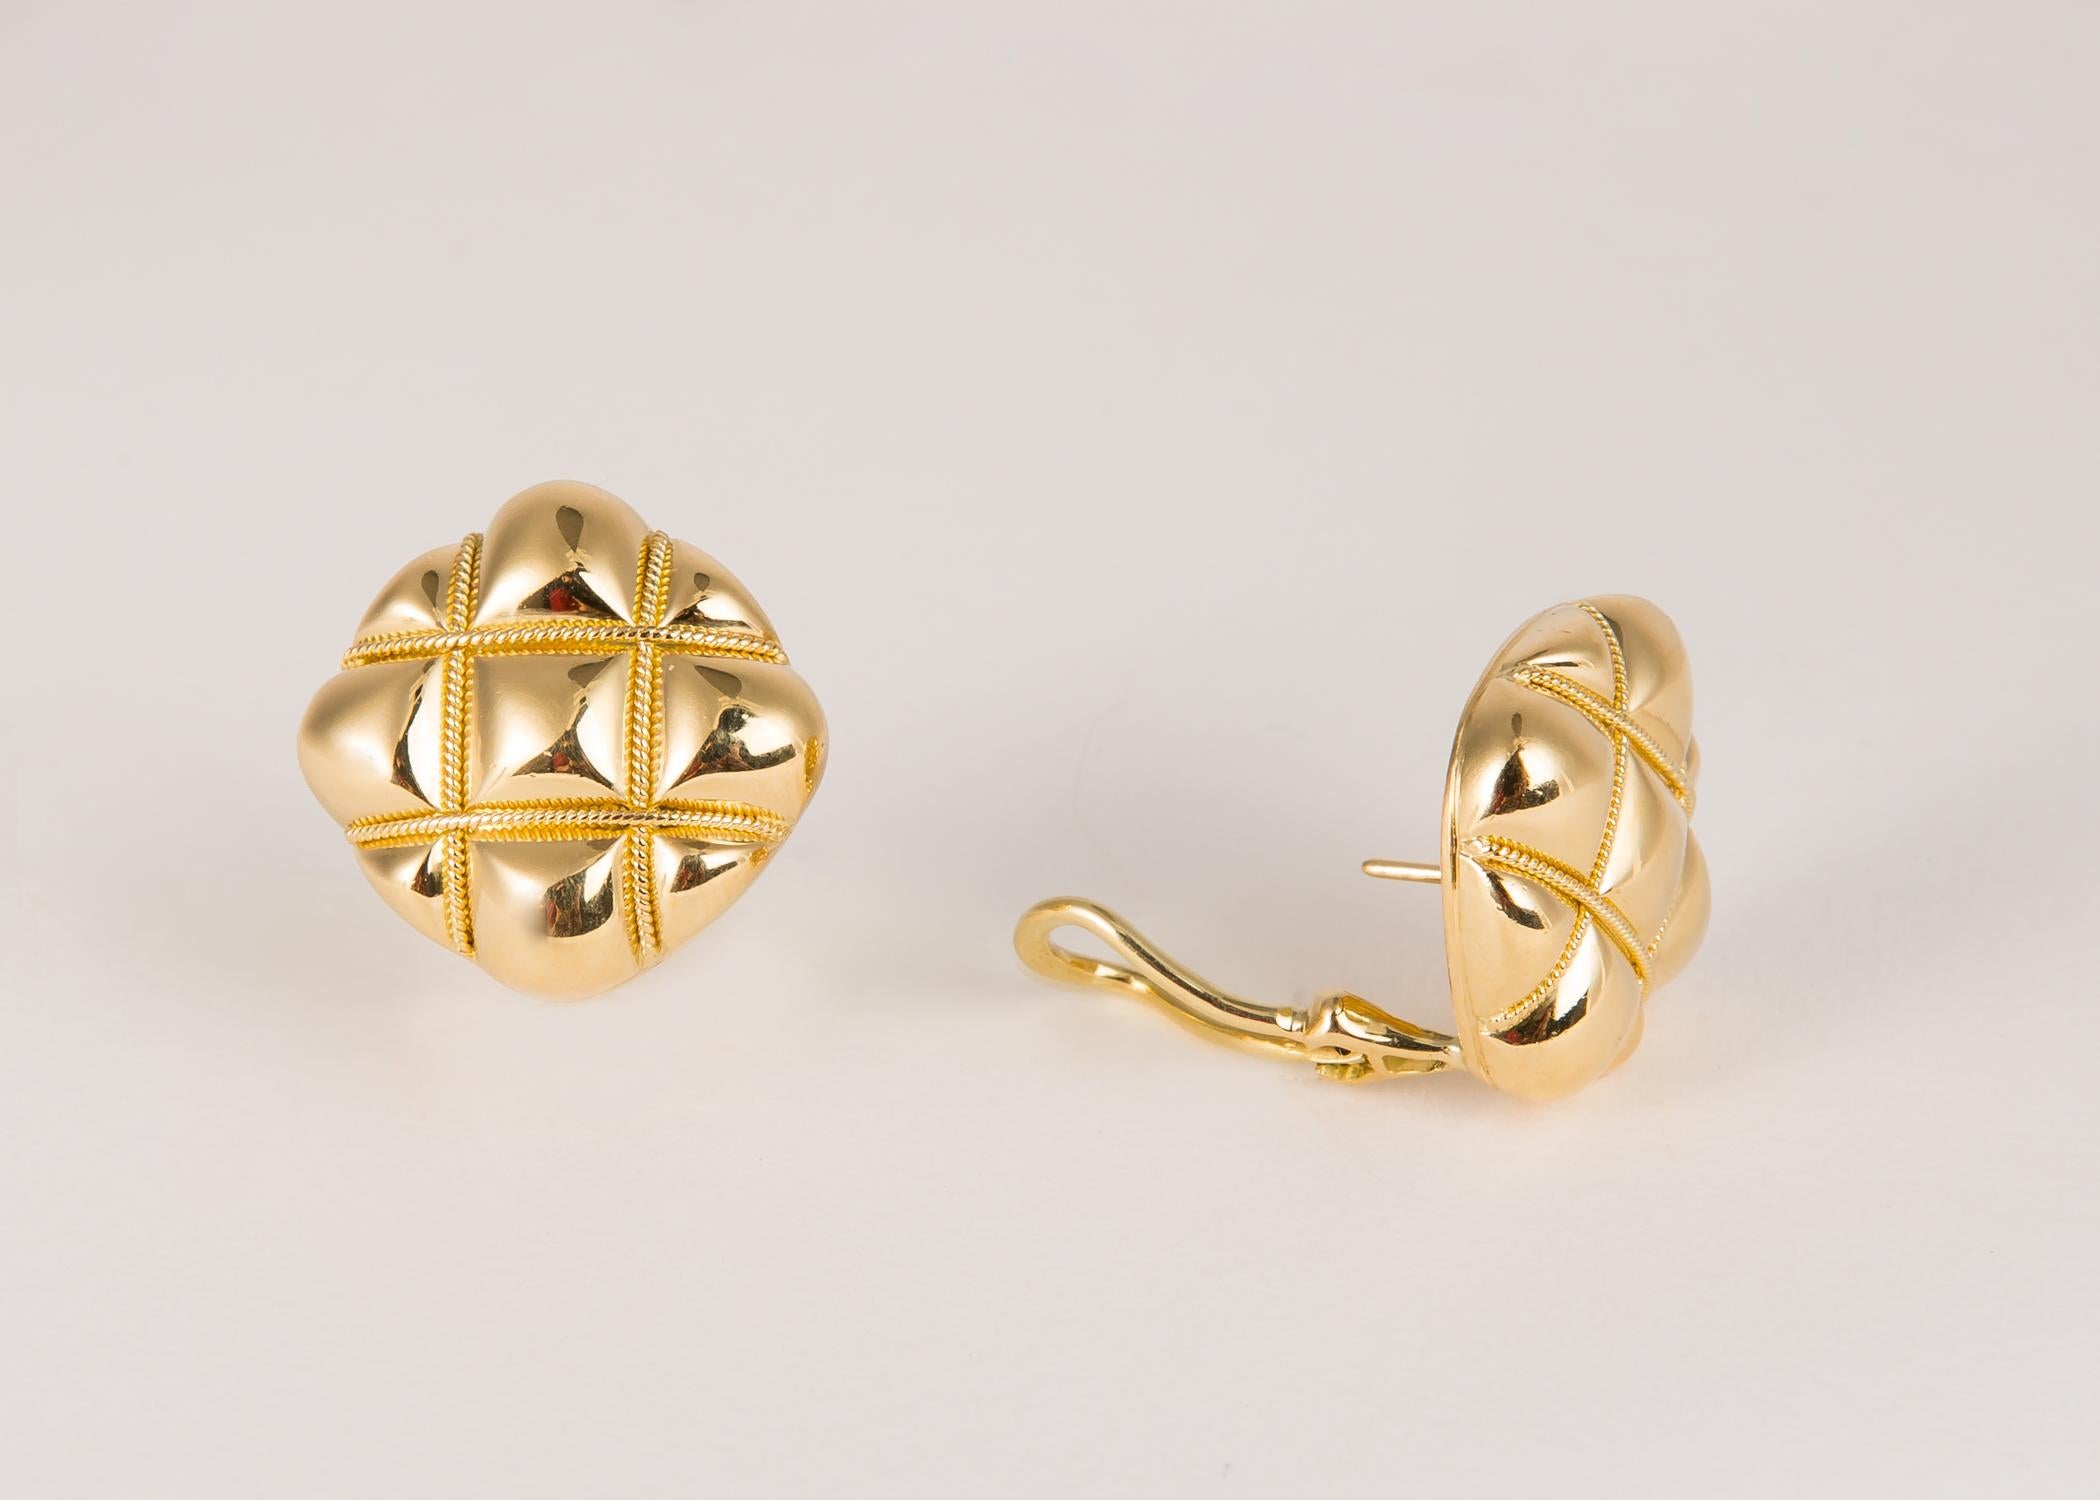 Tiffany & Co. Quilted Gold Earrings In Excellent Condition For Sale In Atlanta, GA